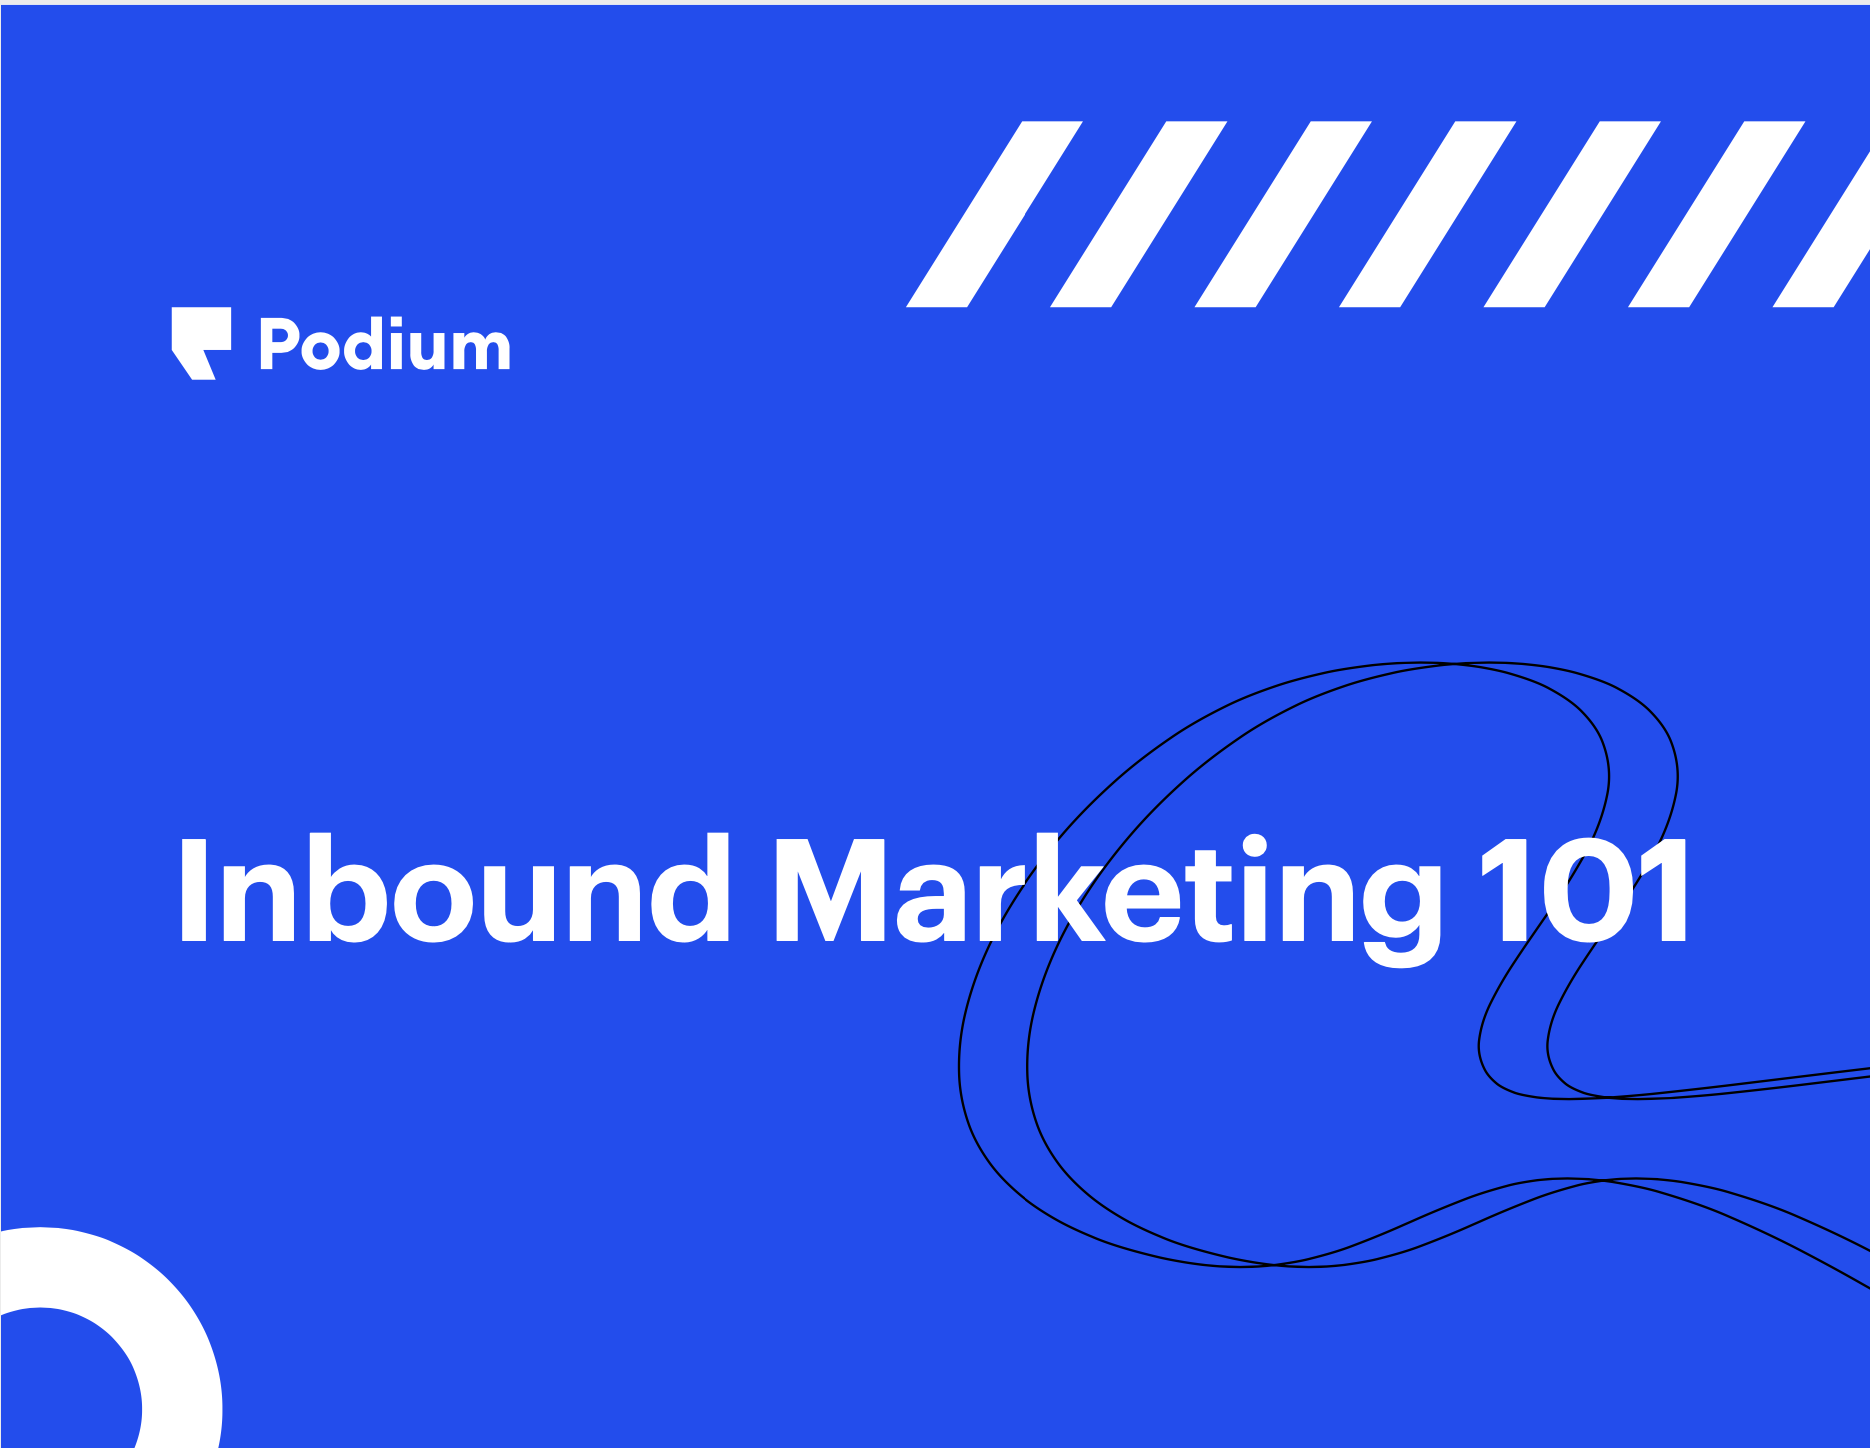 The Guide to Inbound Marketing for Small Business